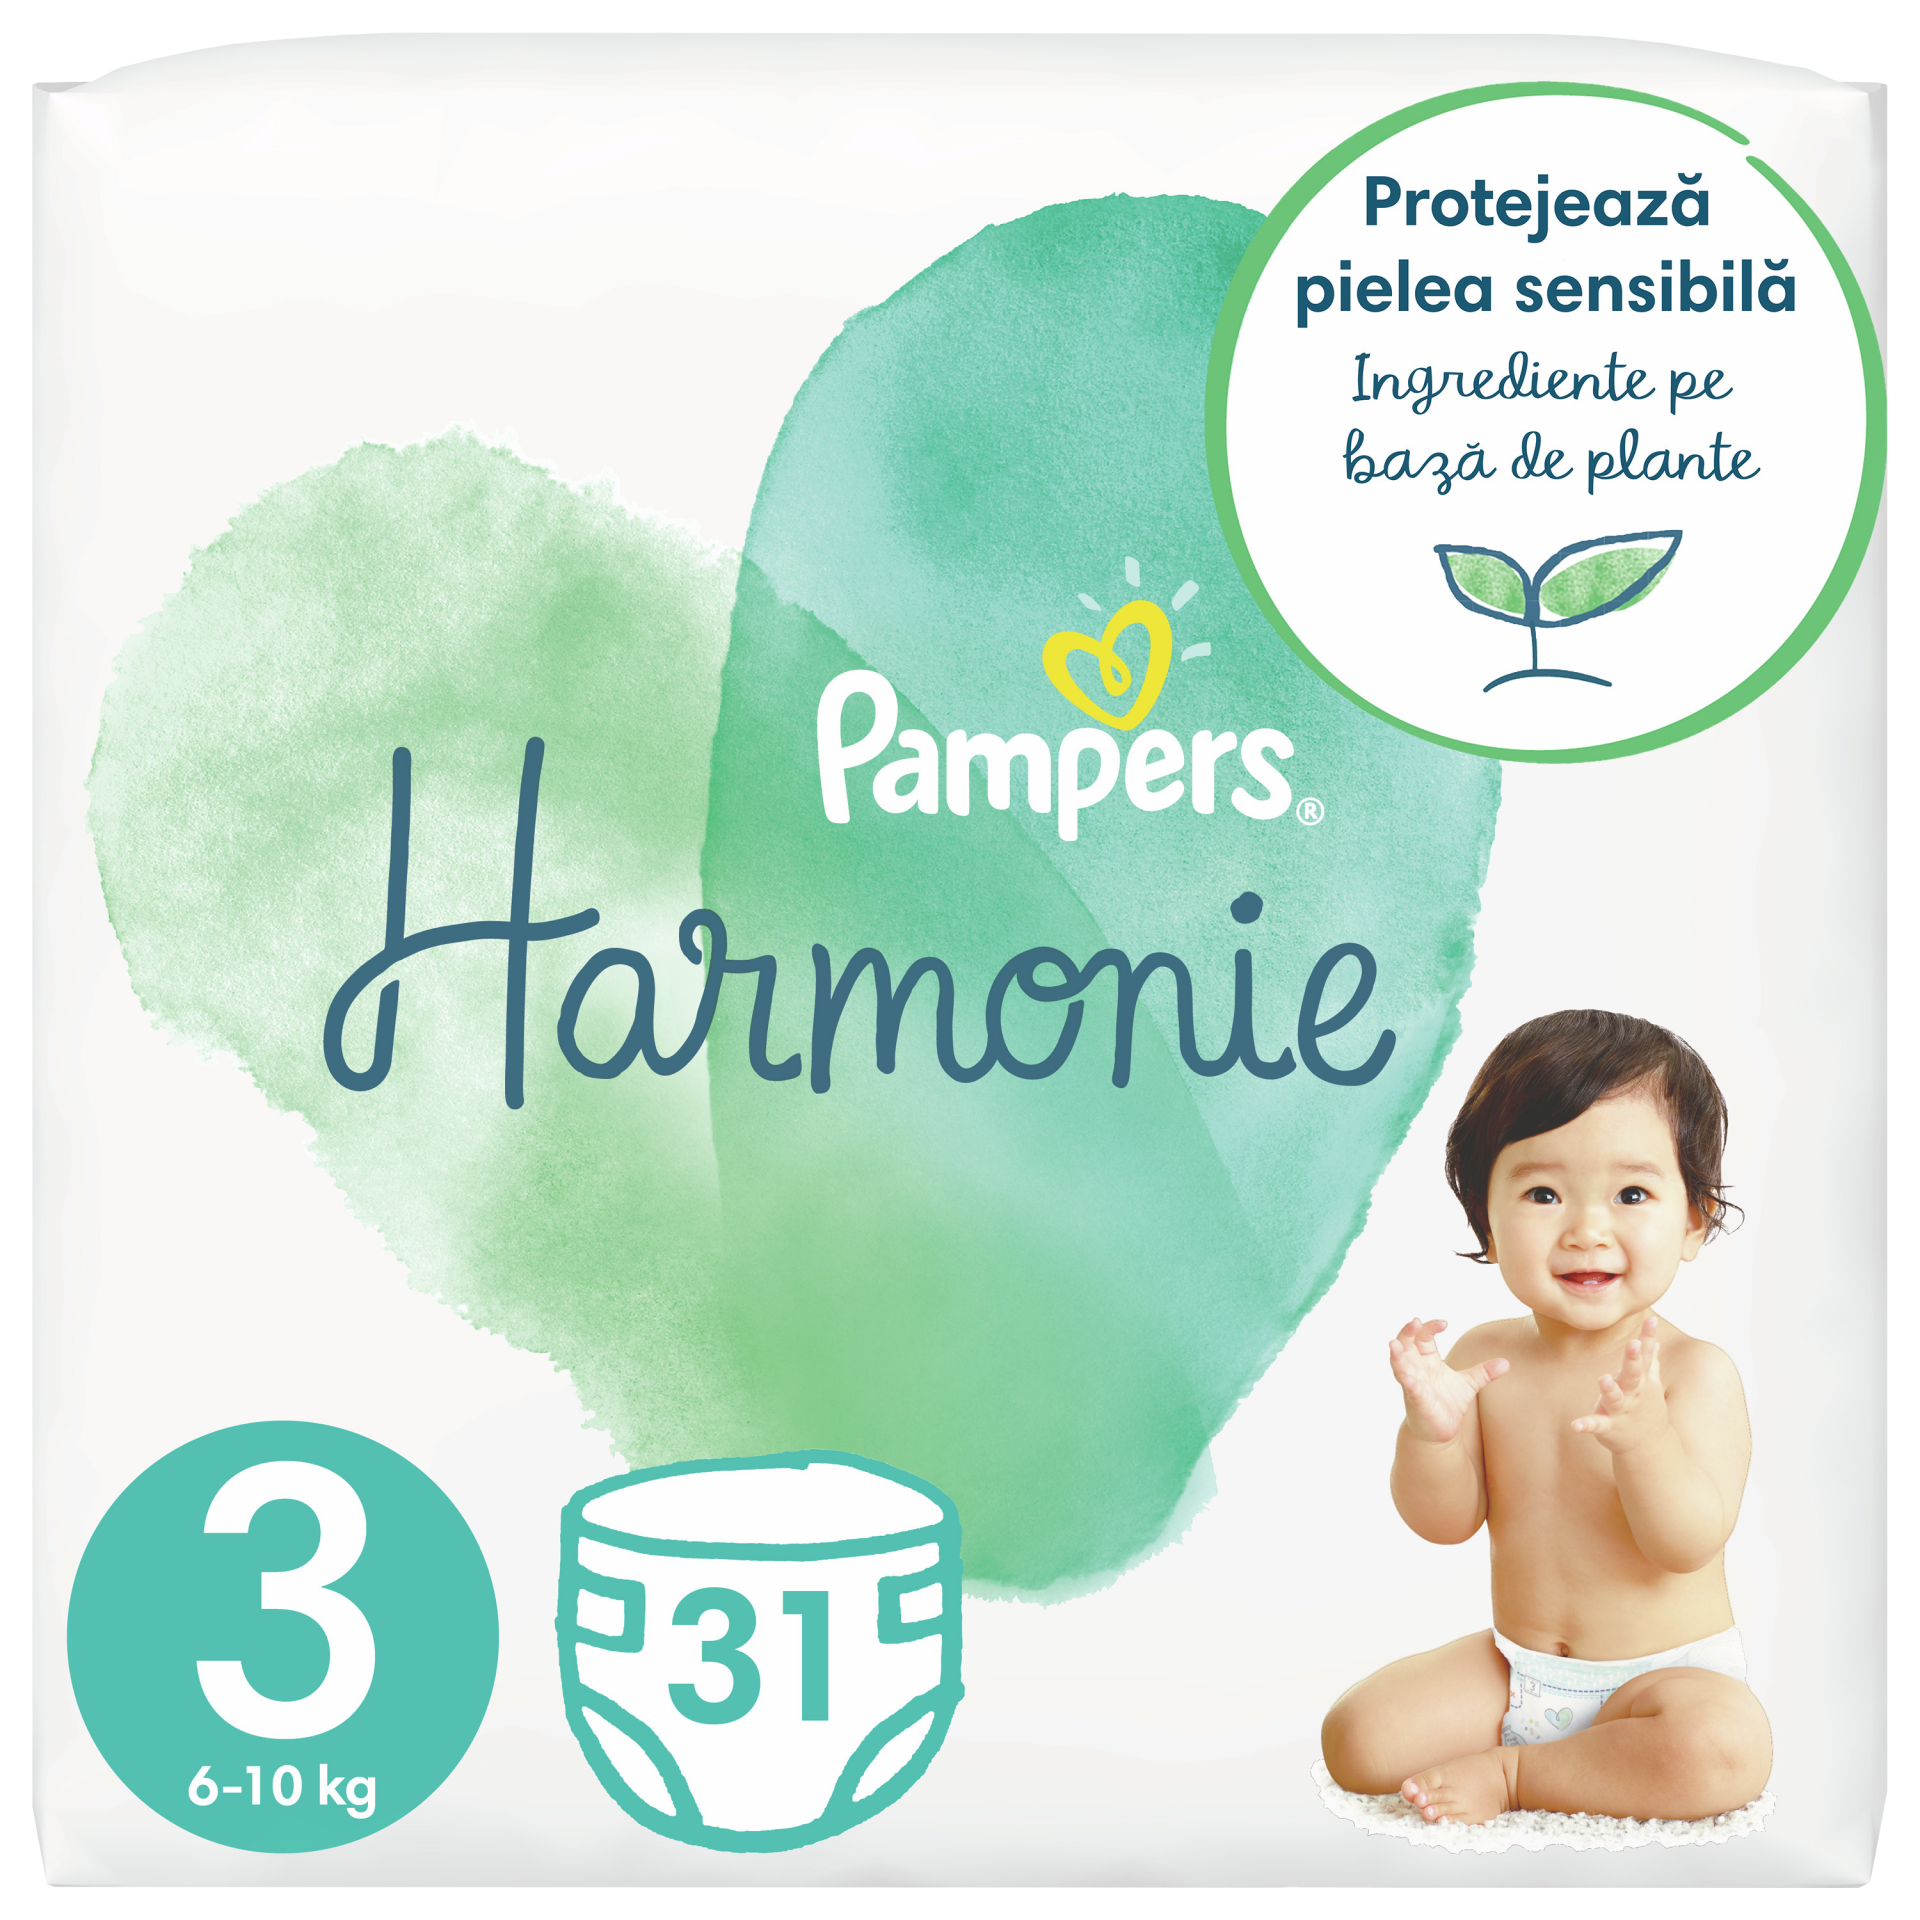 Pampers Harmonie - Diapers, size 4 (9-14 kg), 28 pcs